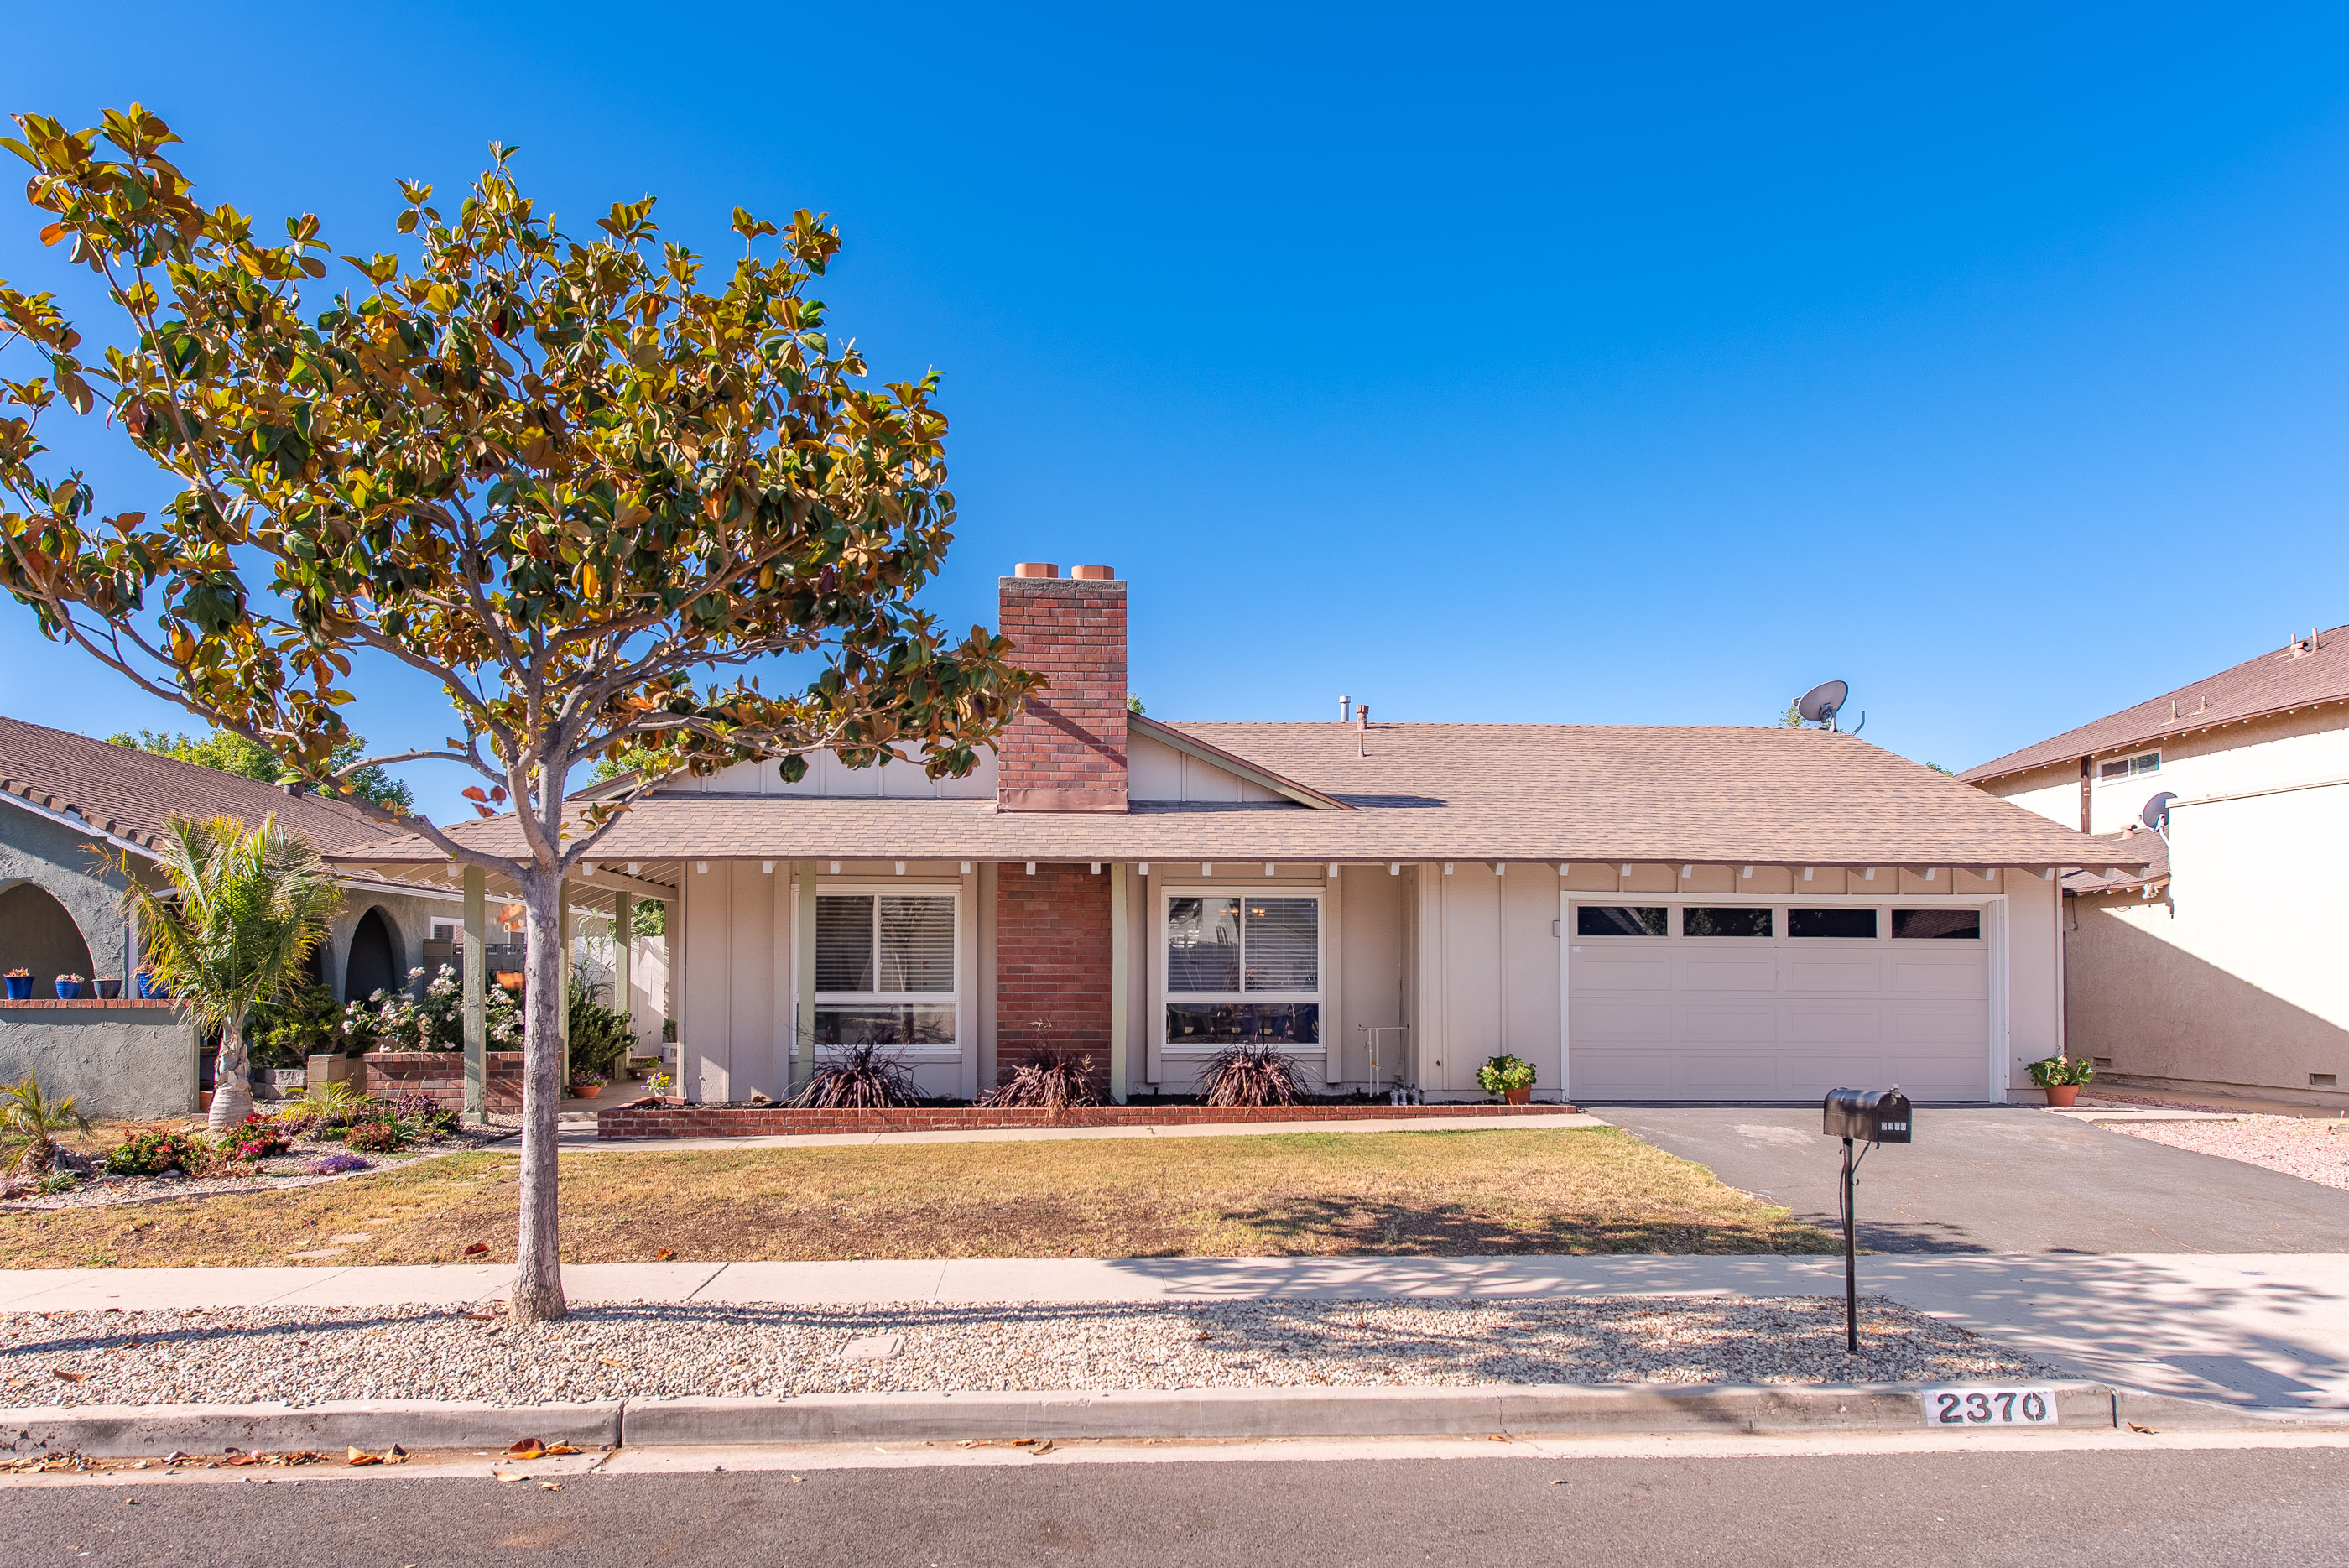 2370 Larch St Simi Valley CA 93065